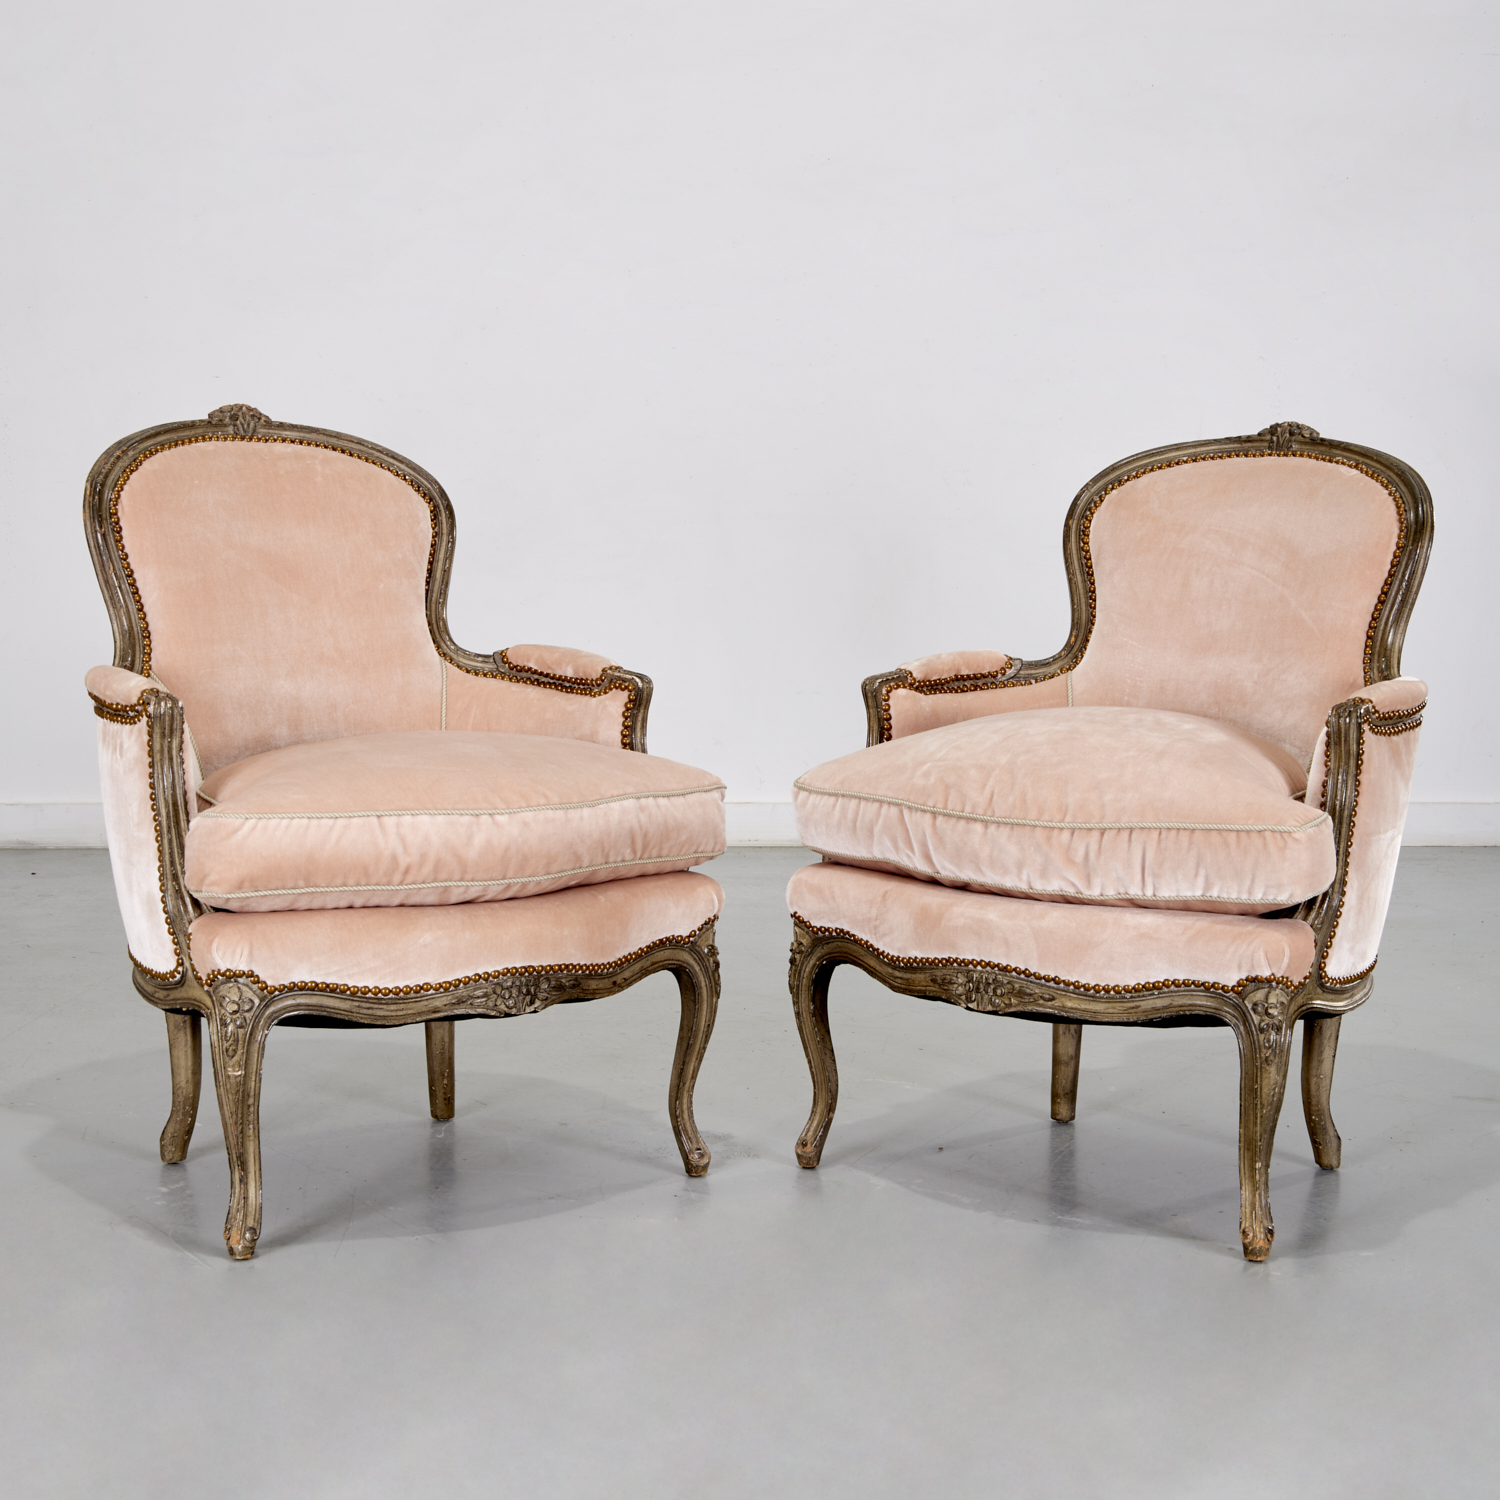 PAIR LOUIS XV STYLE GREY PAINTED